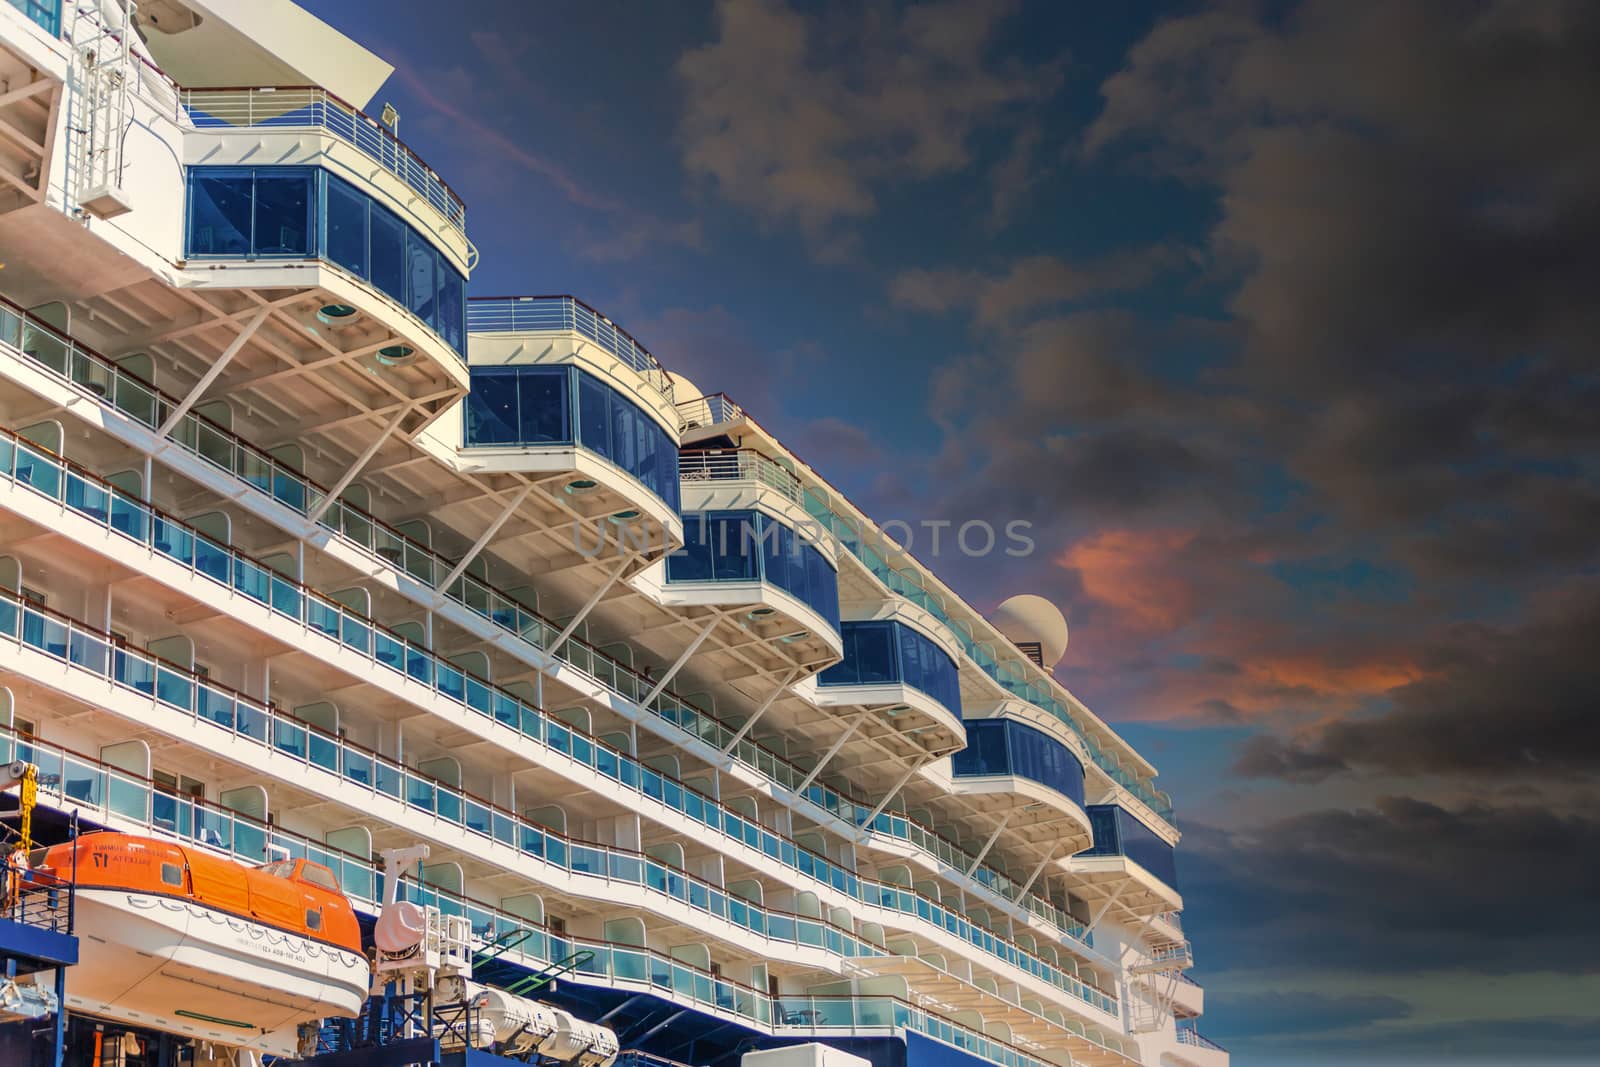 Upper windows of a luxury cruise ship against blue sky